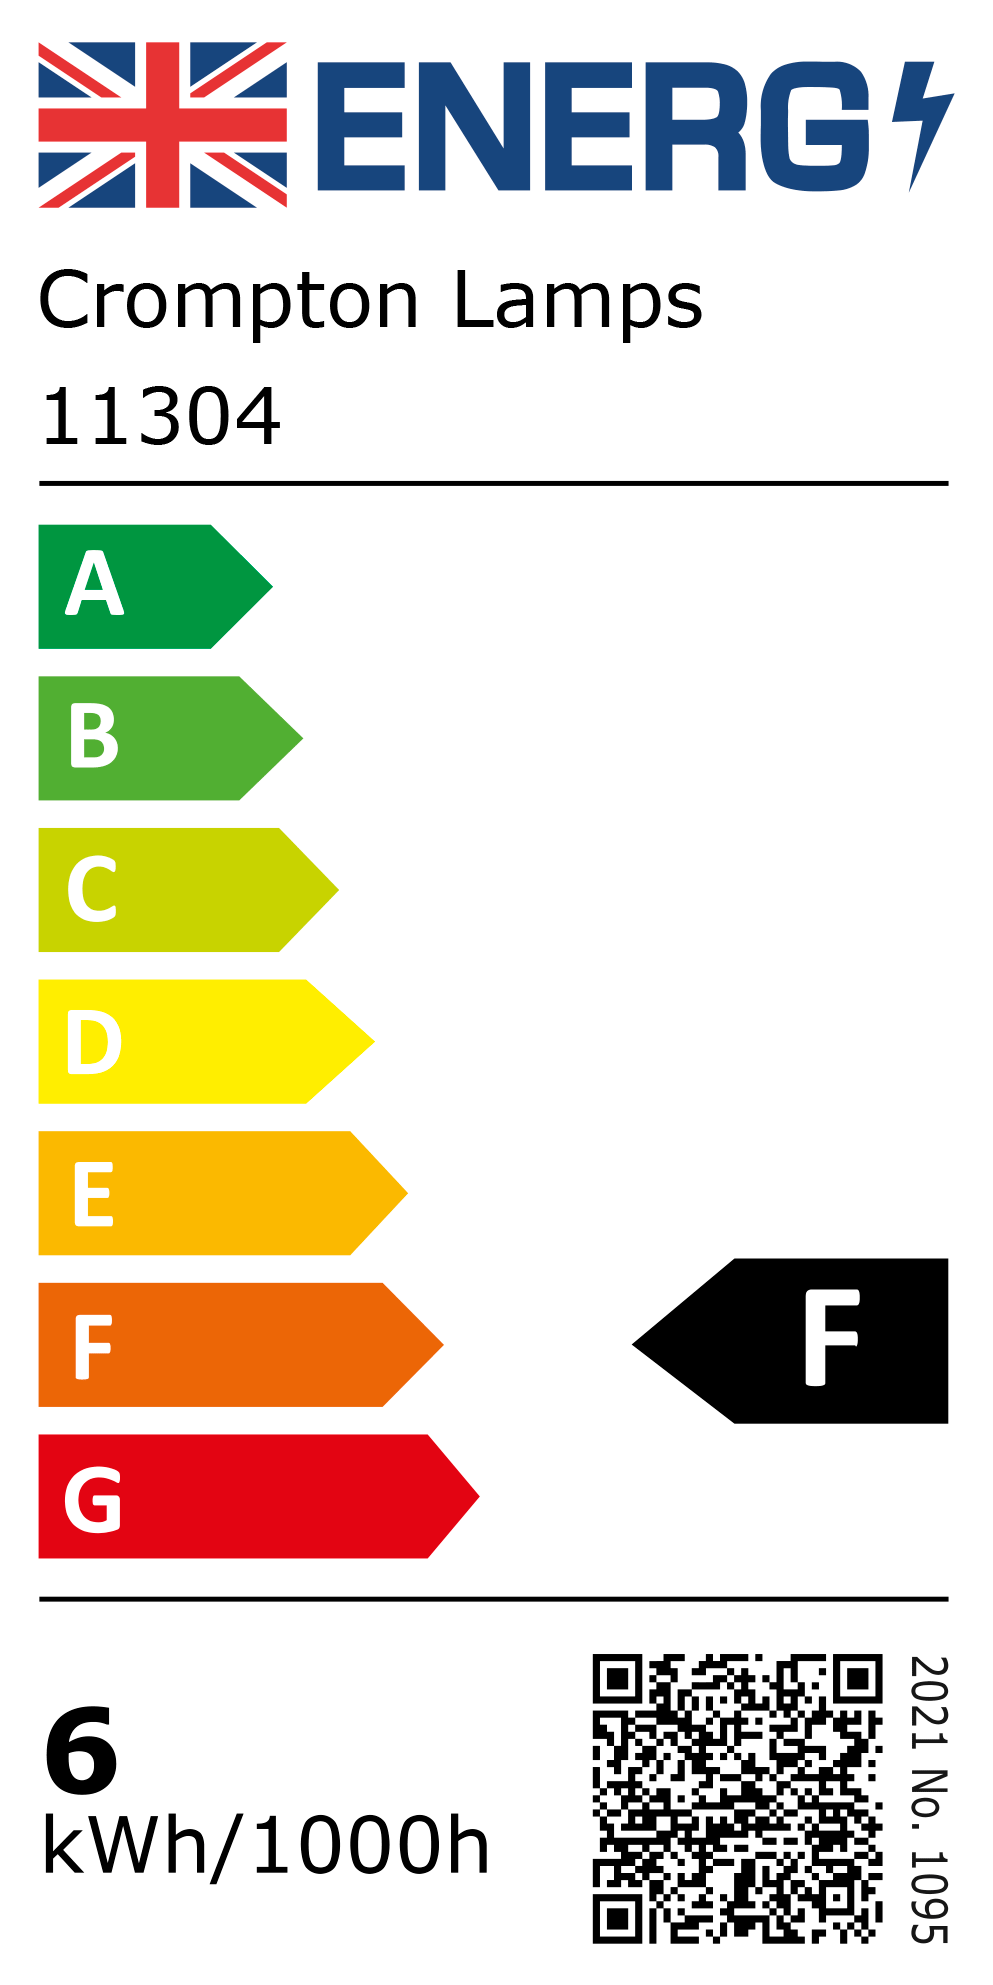 New 2021 Energy Rating Label: Stock Code 11304